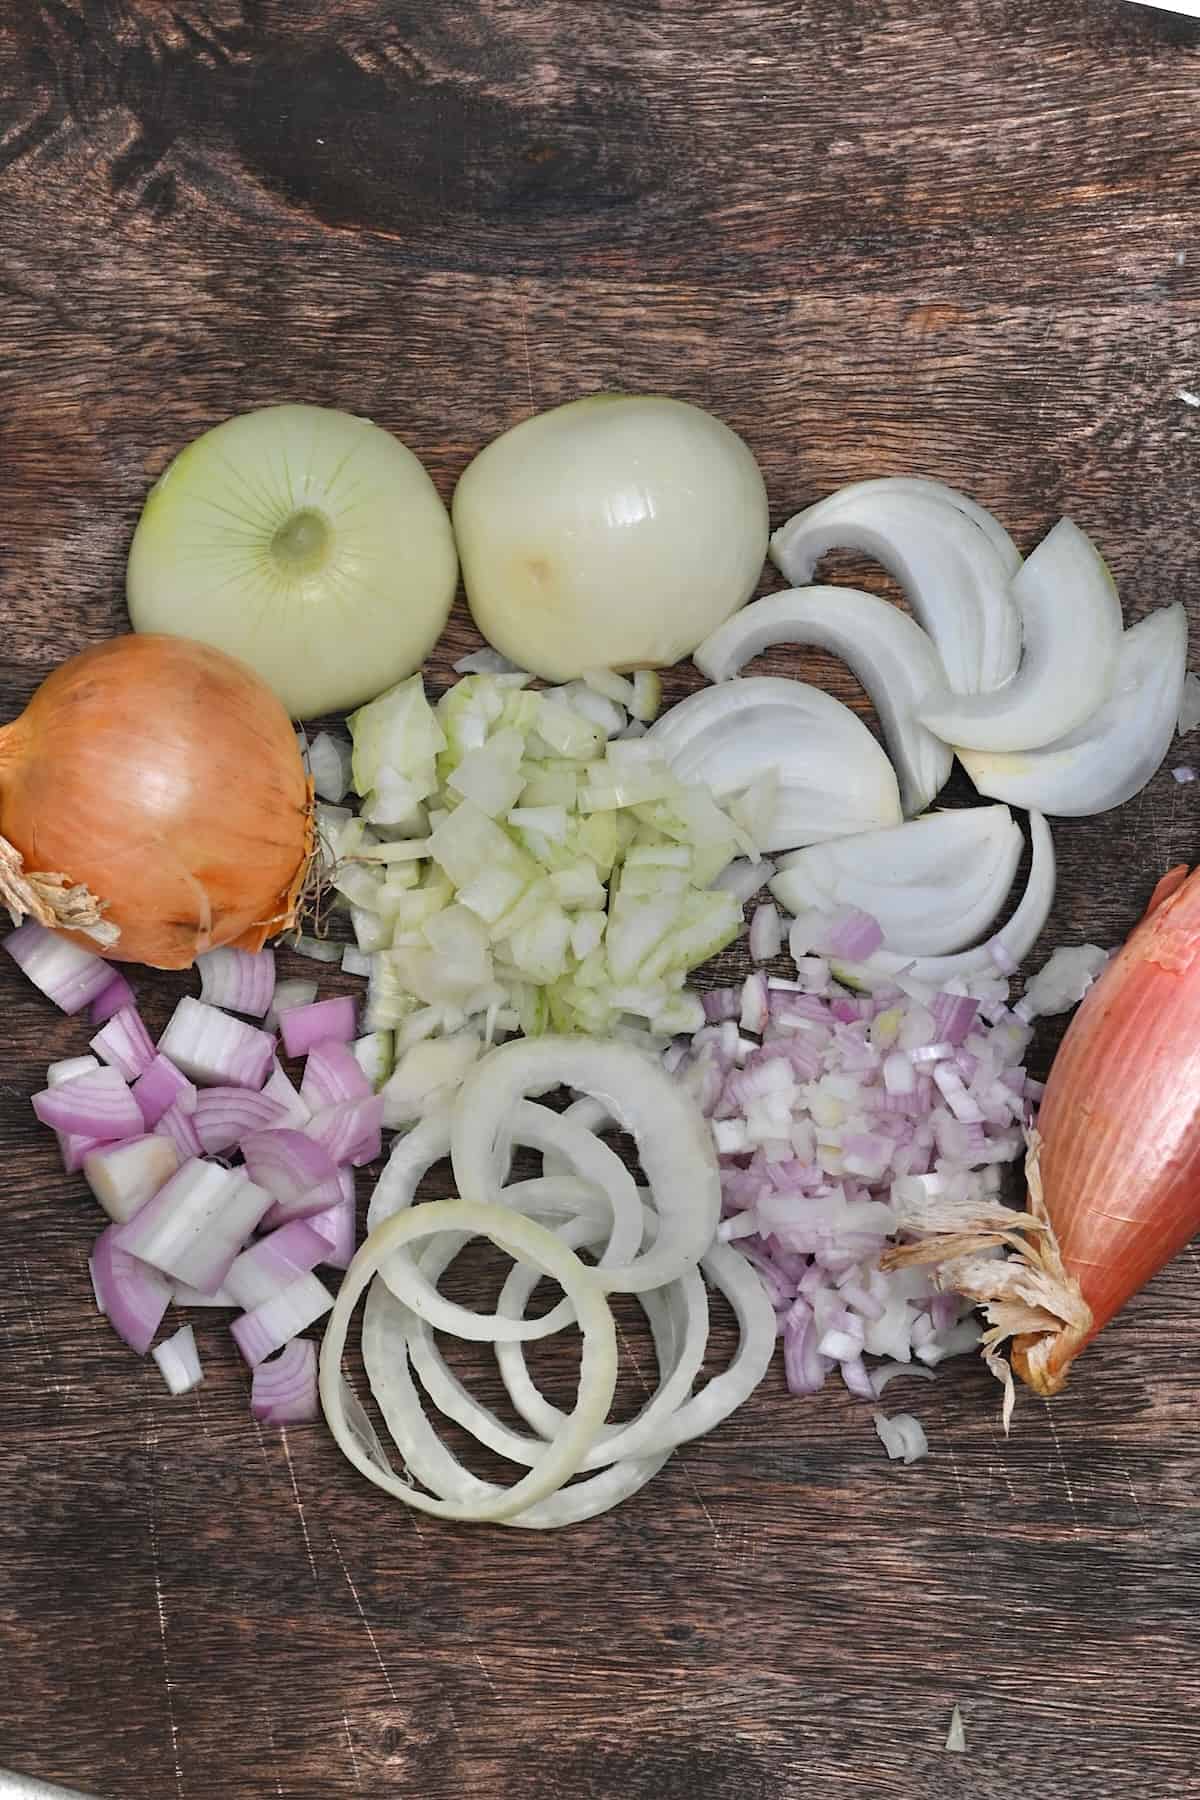 How to Correctly Chop an Onion